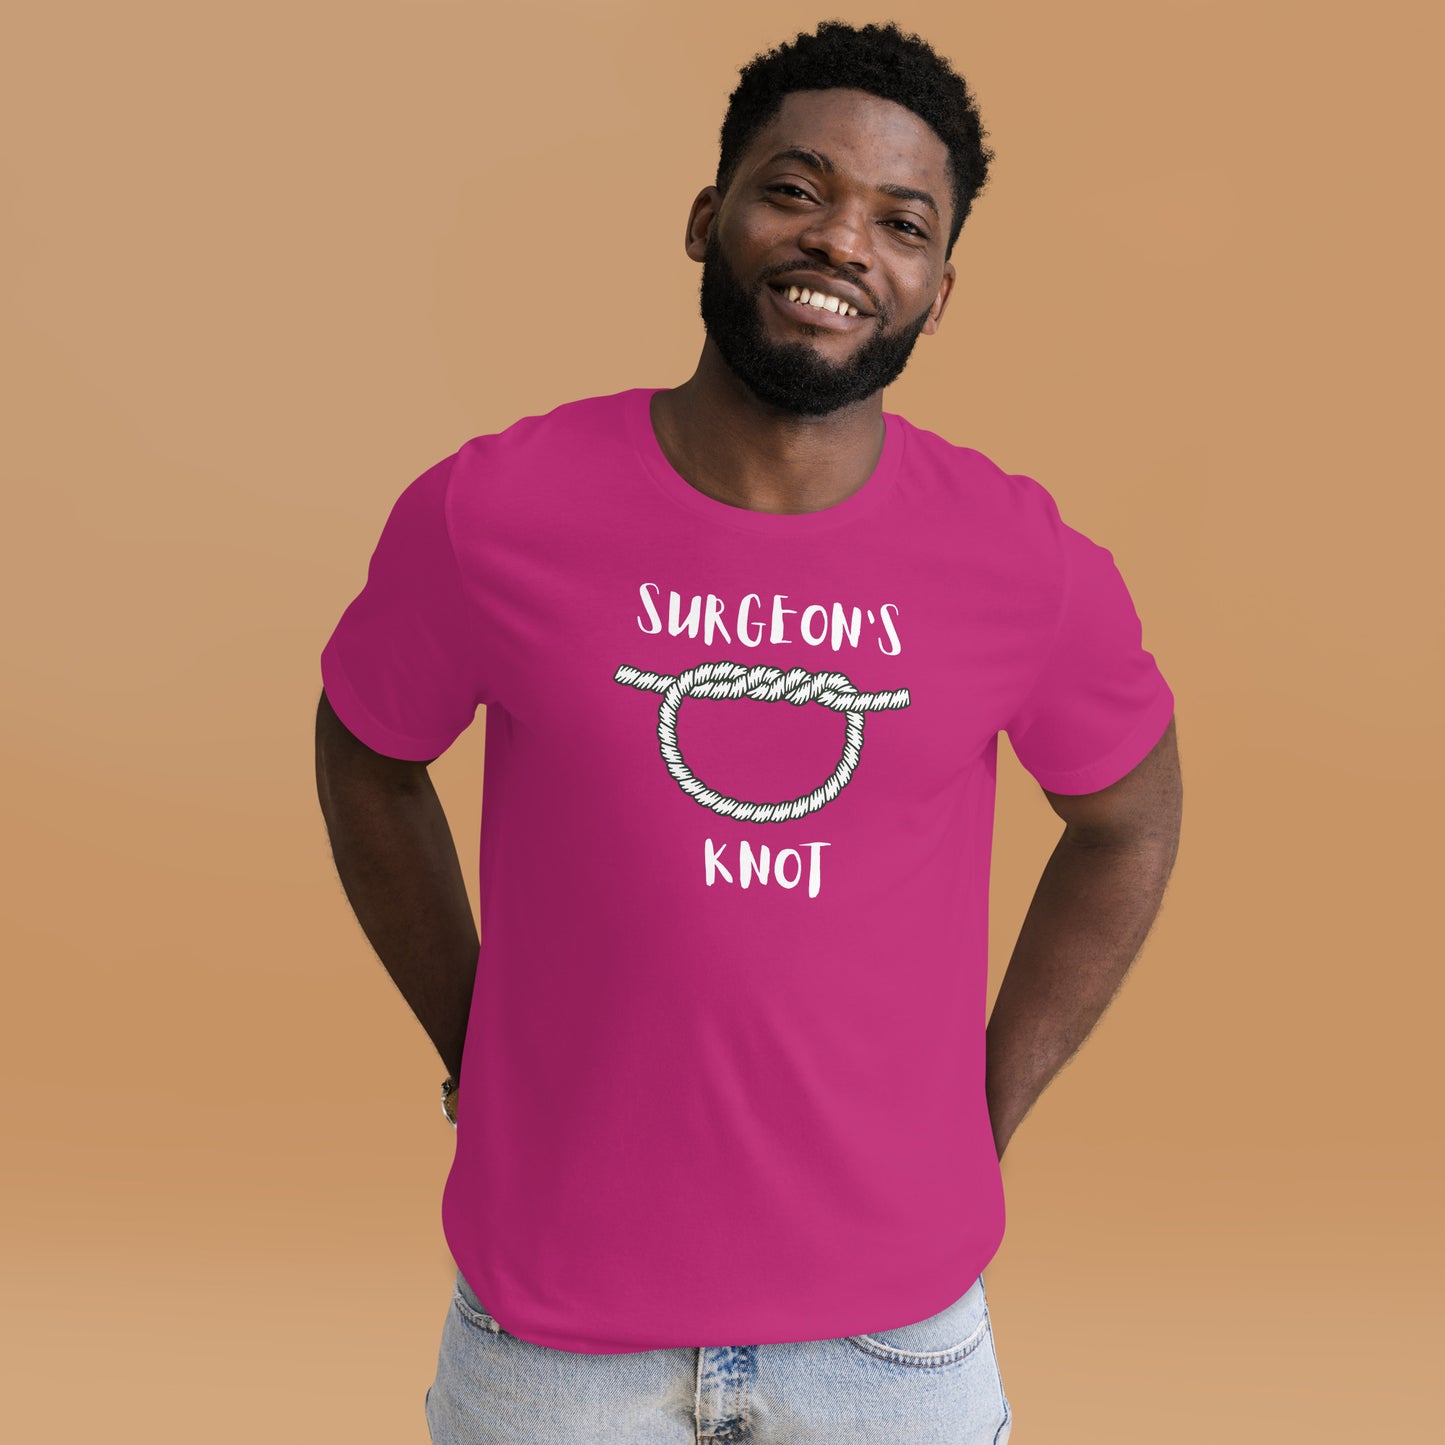 Graphic Tee, Surgeon's Knot, Surgeon, Surgery, Ortho, OB/Gyn, Funny Doctor Shirt, Medical Student, Funny Nurse Shirt, Funny Resident Shirt, Doctor, Physician, Resident, Nurse, PA, NP, Medical Student